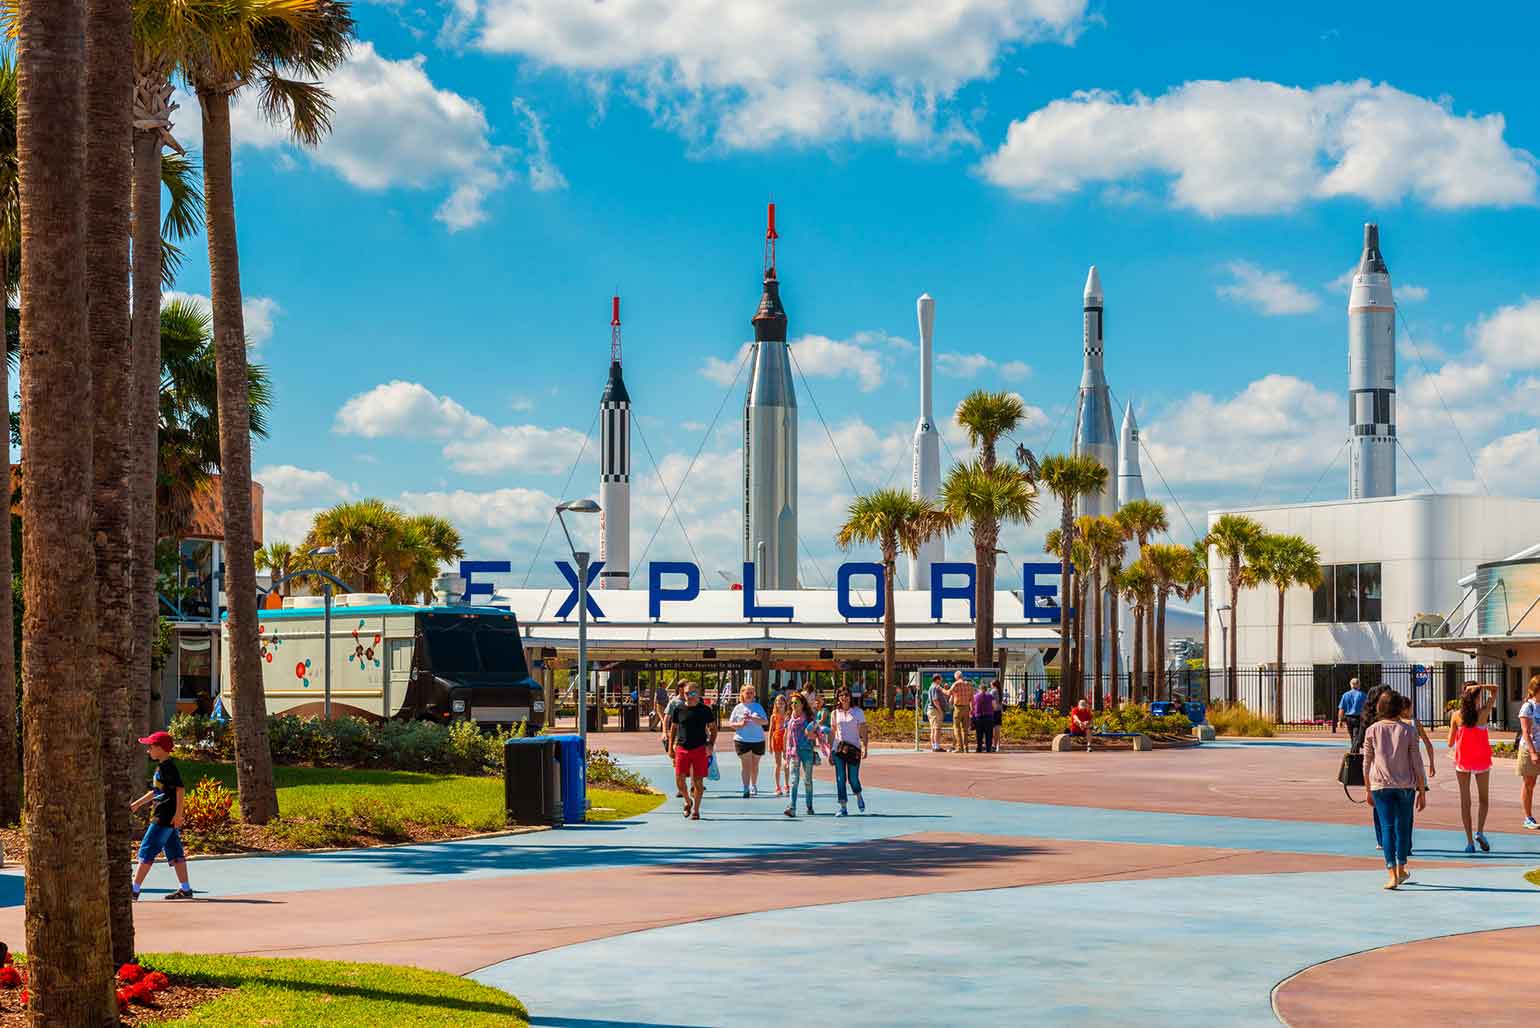 Canaveral’s Kennedy Space Center